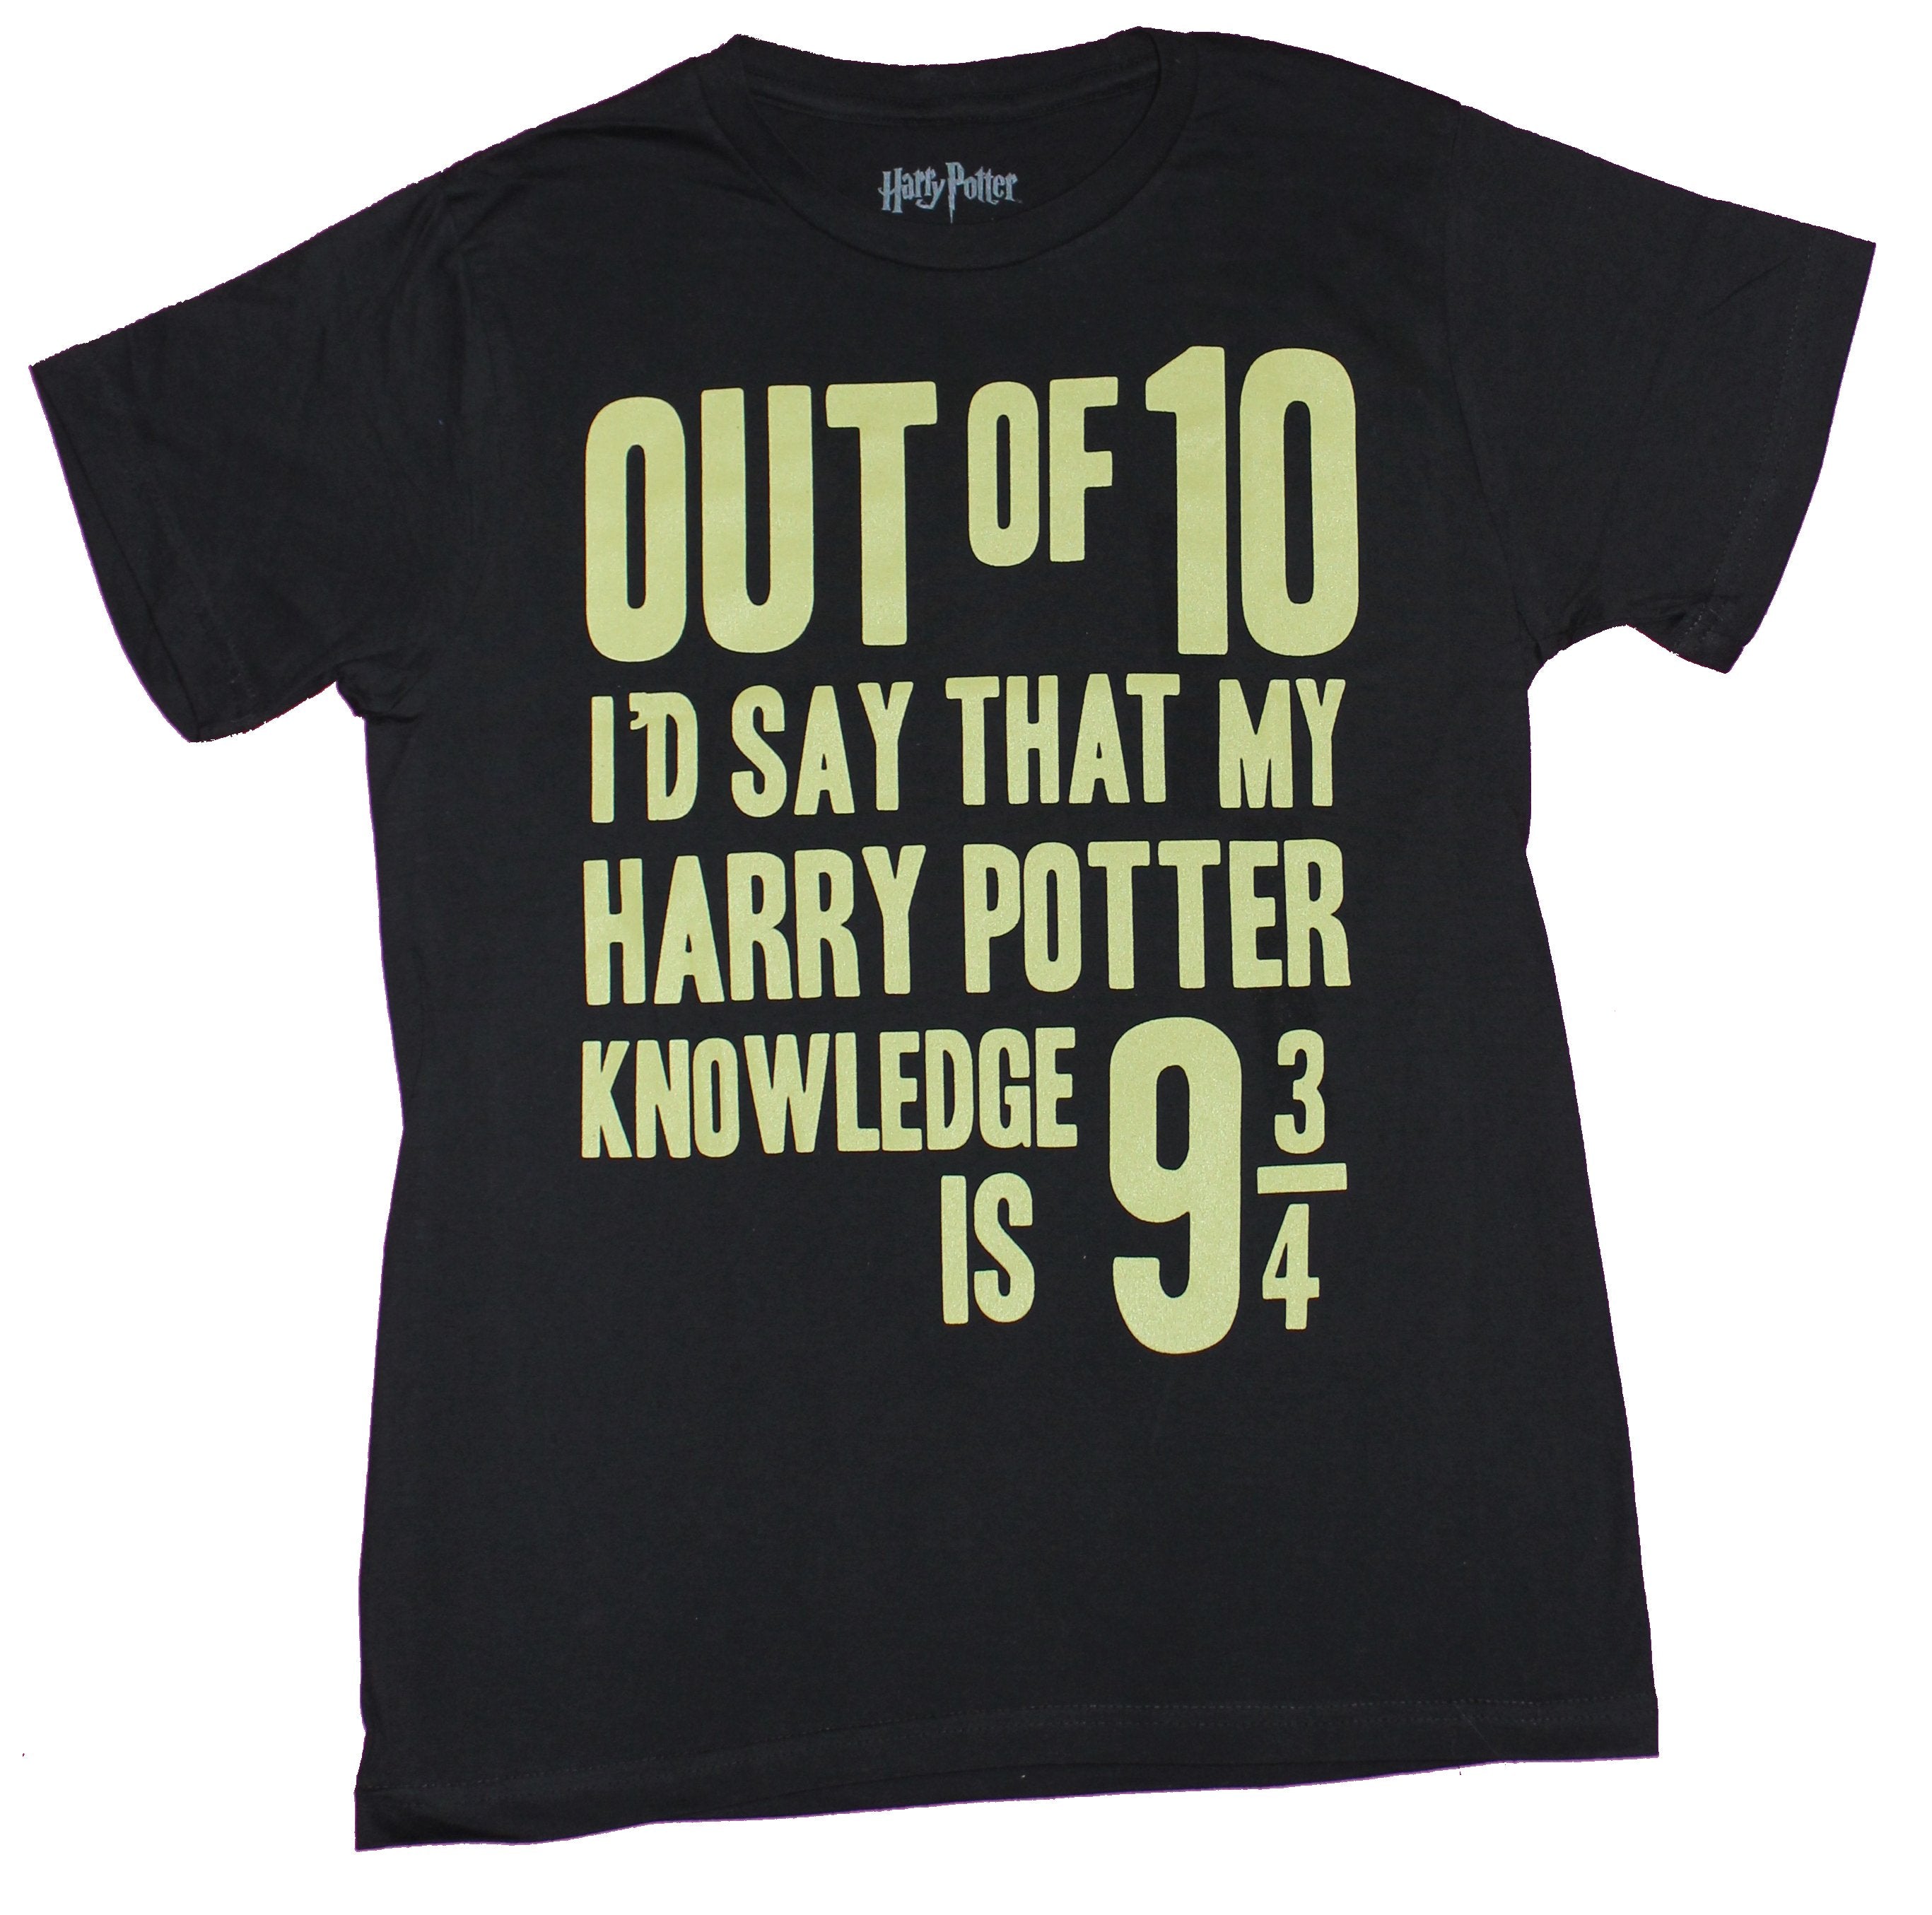 tom Pompeji status Harry Potter Mens T-Shirt - Out of 10 My Knowledge is 9 3/4